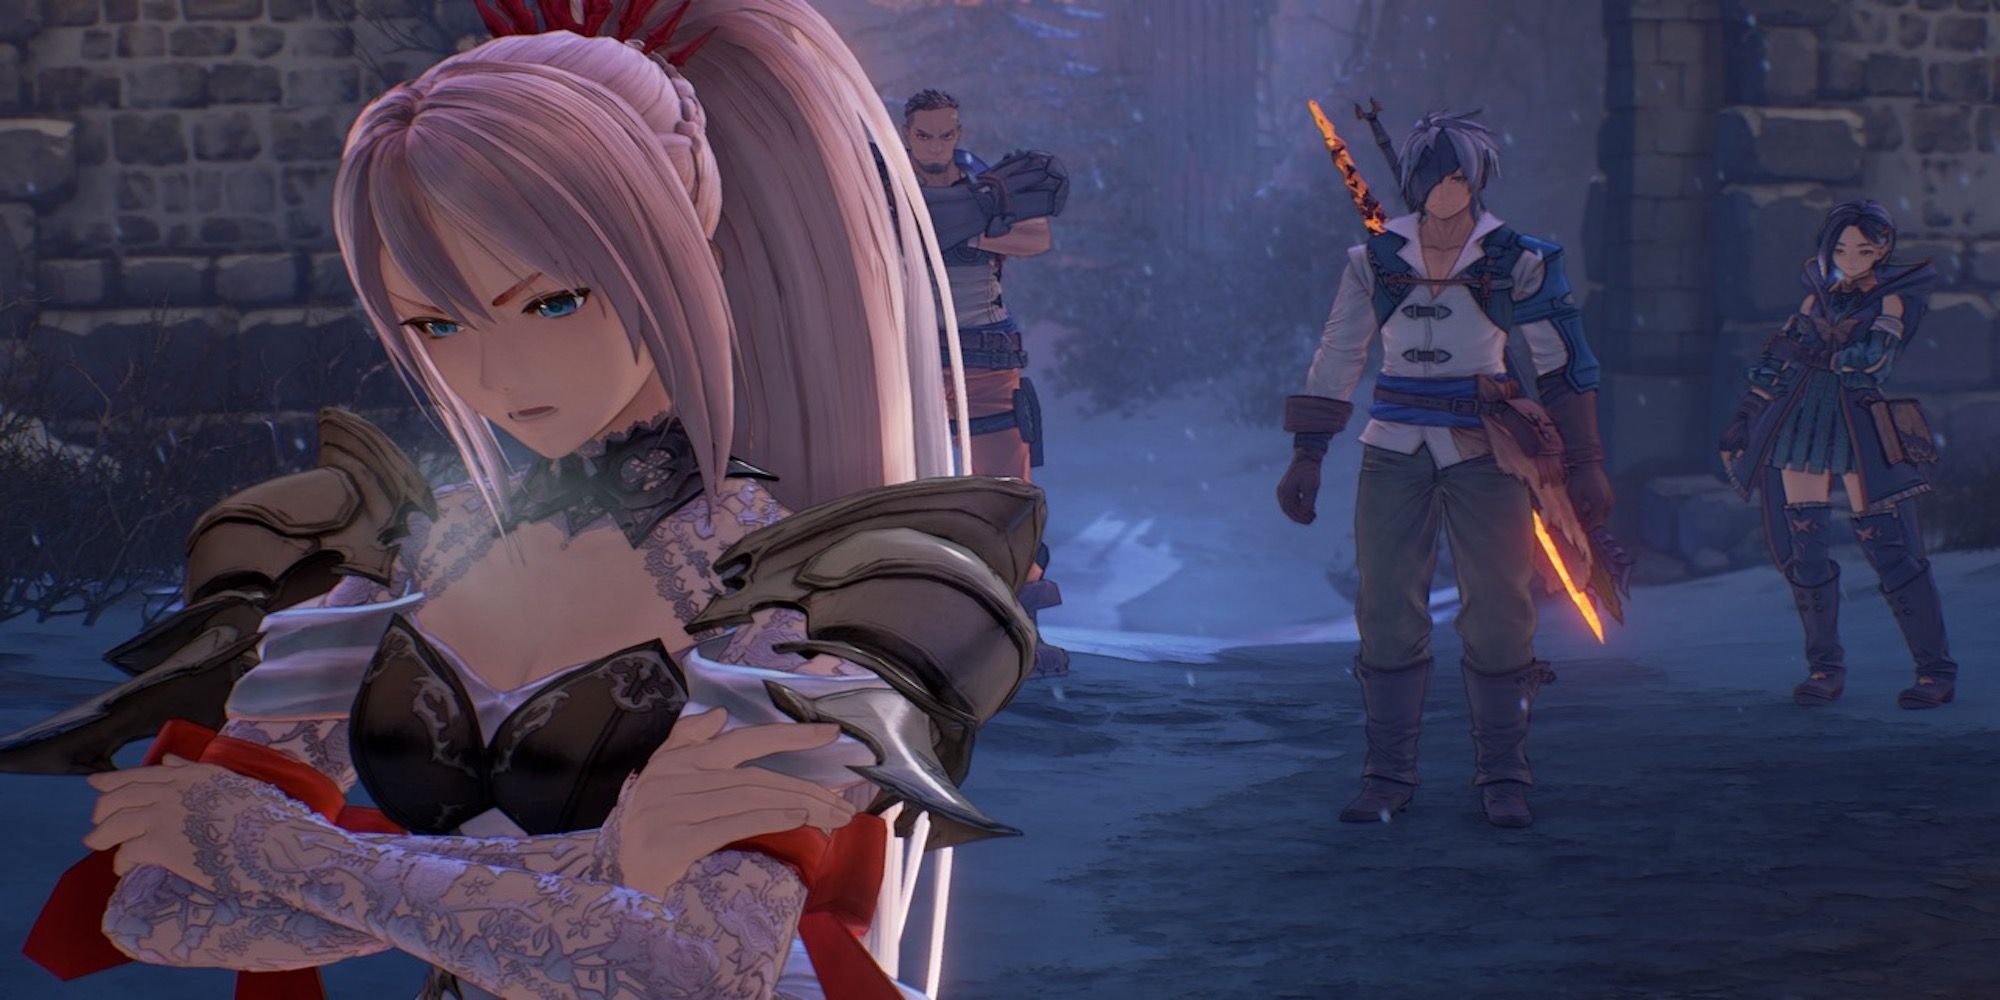 A cutscene featuring characters from Tales of Arise